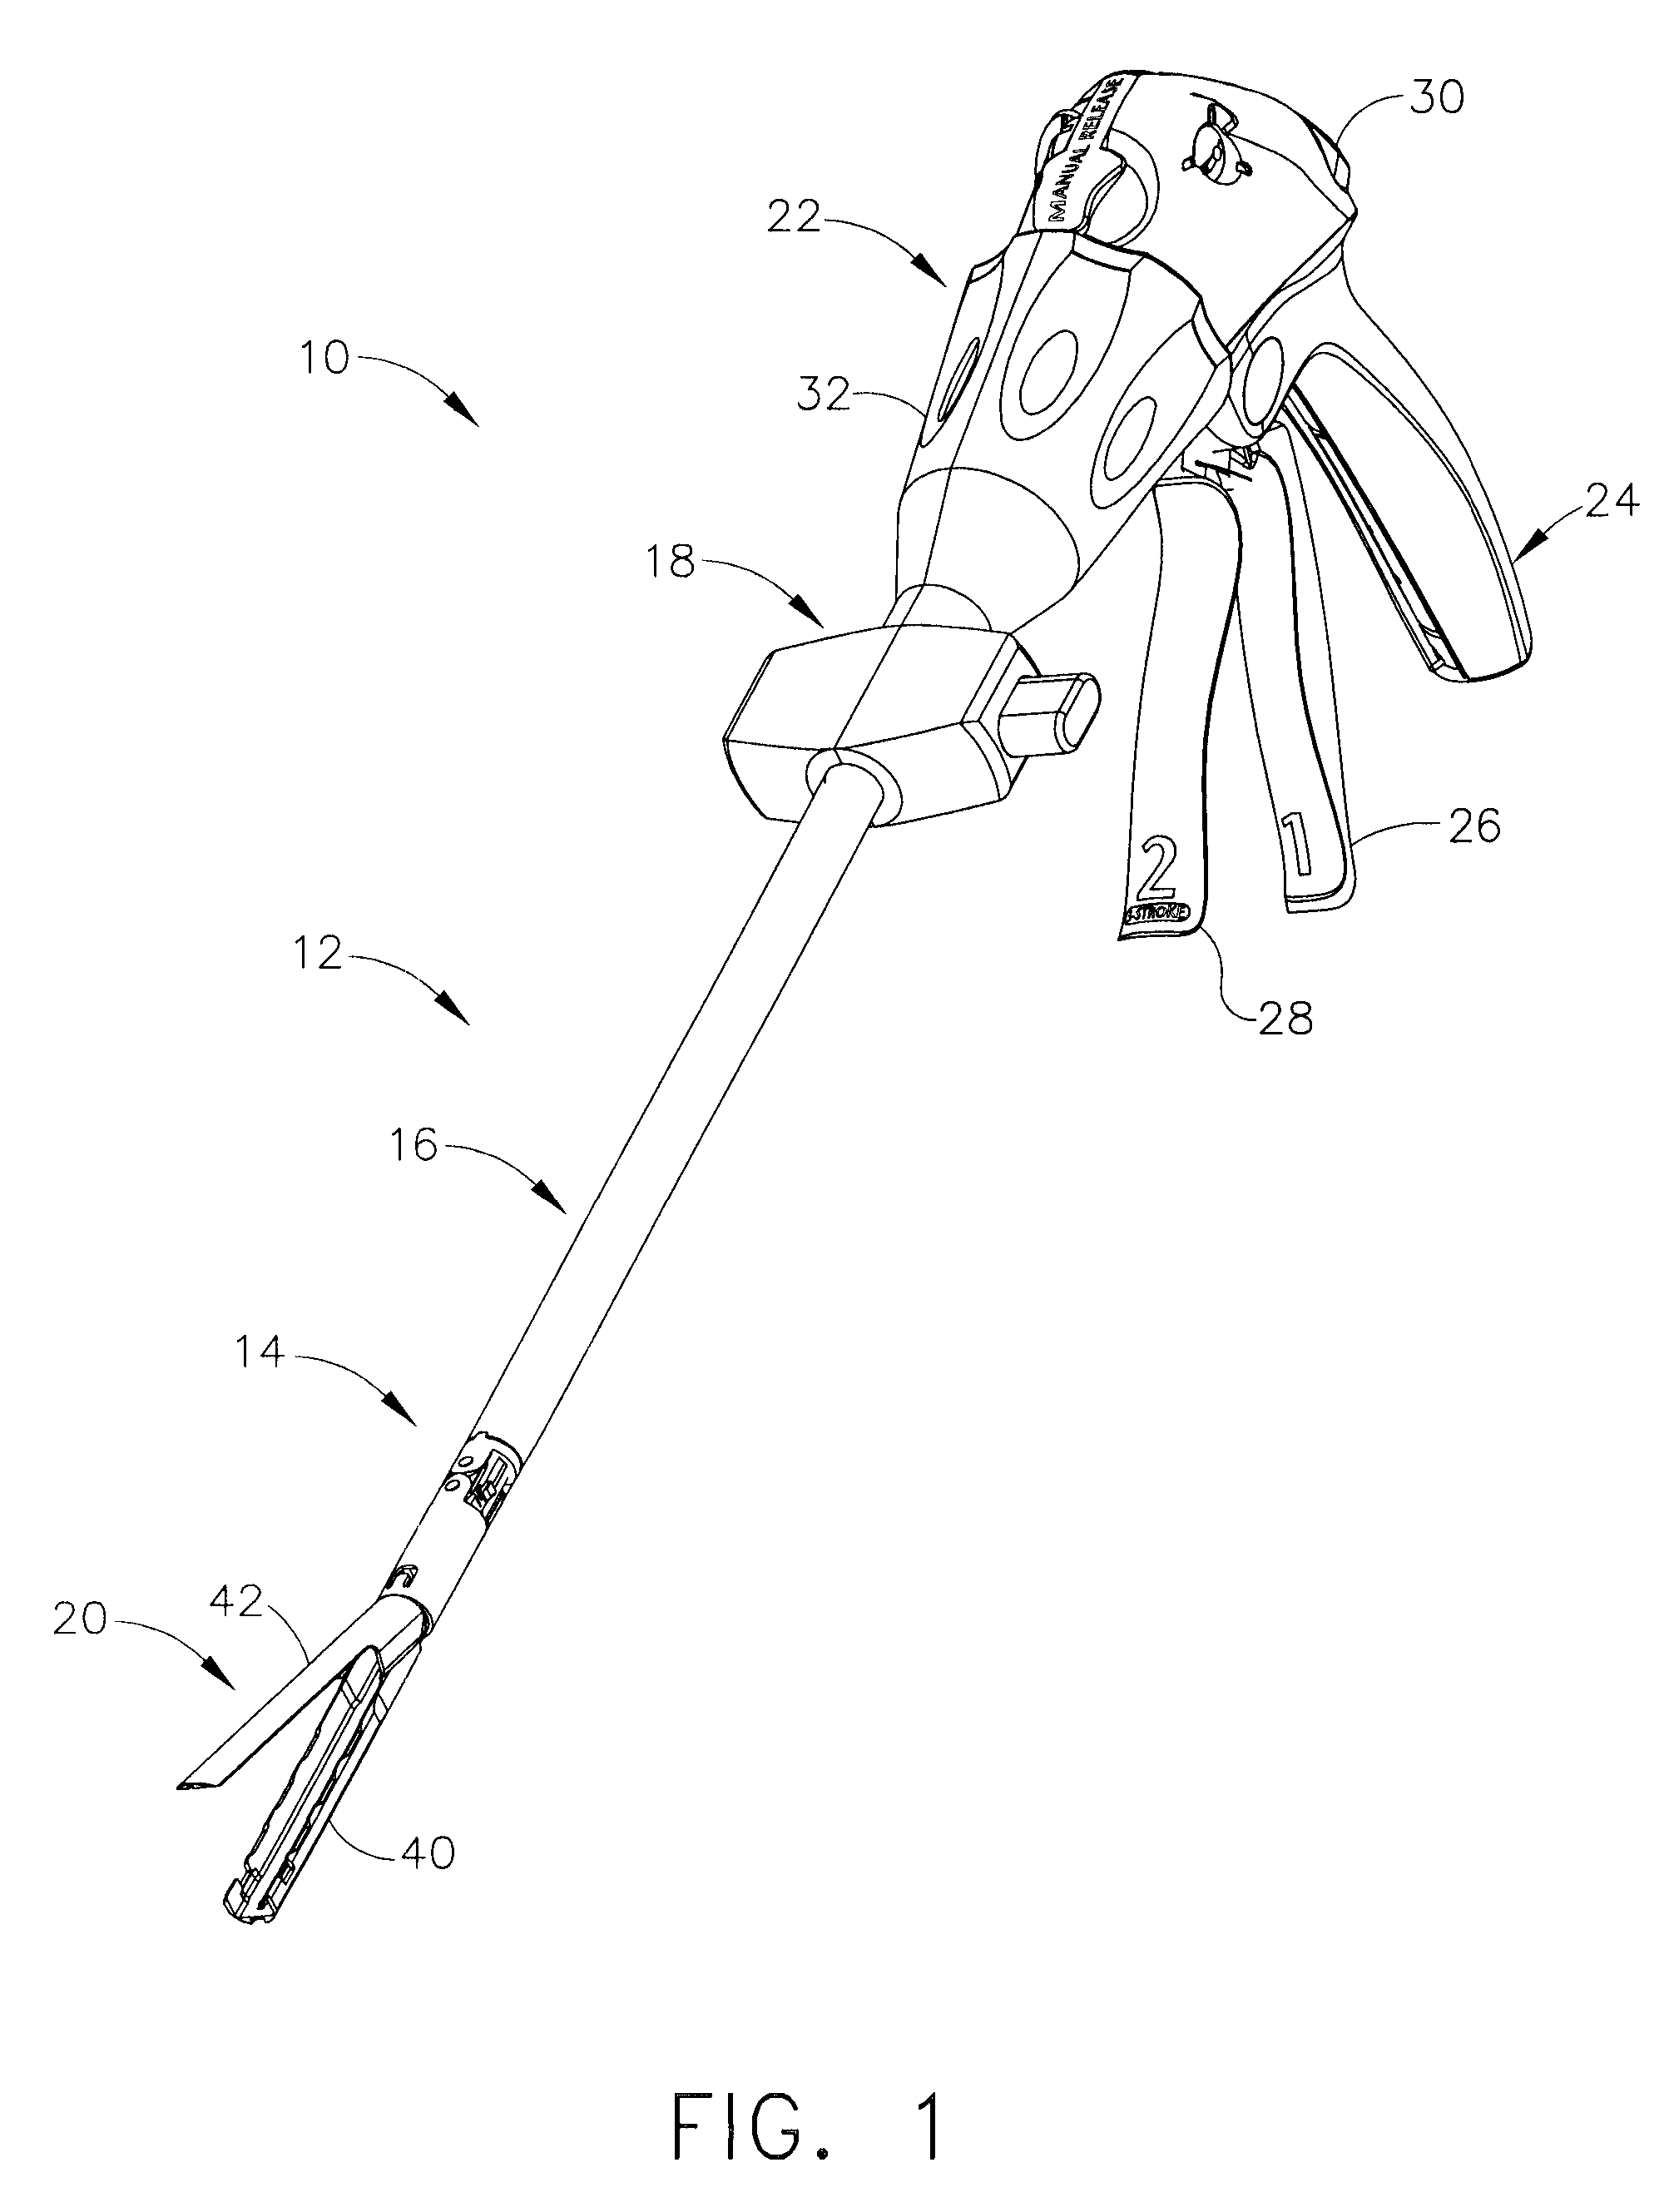 Surgical instrument with articulating shaft with single pivot closure and double pivot frame ground